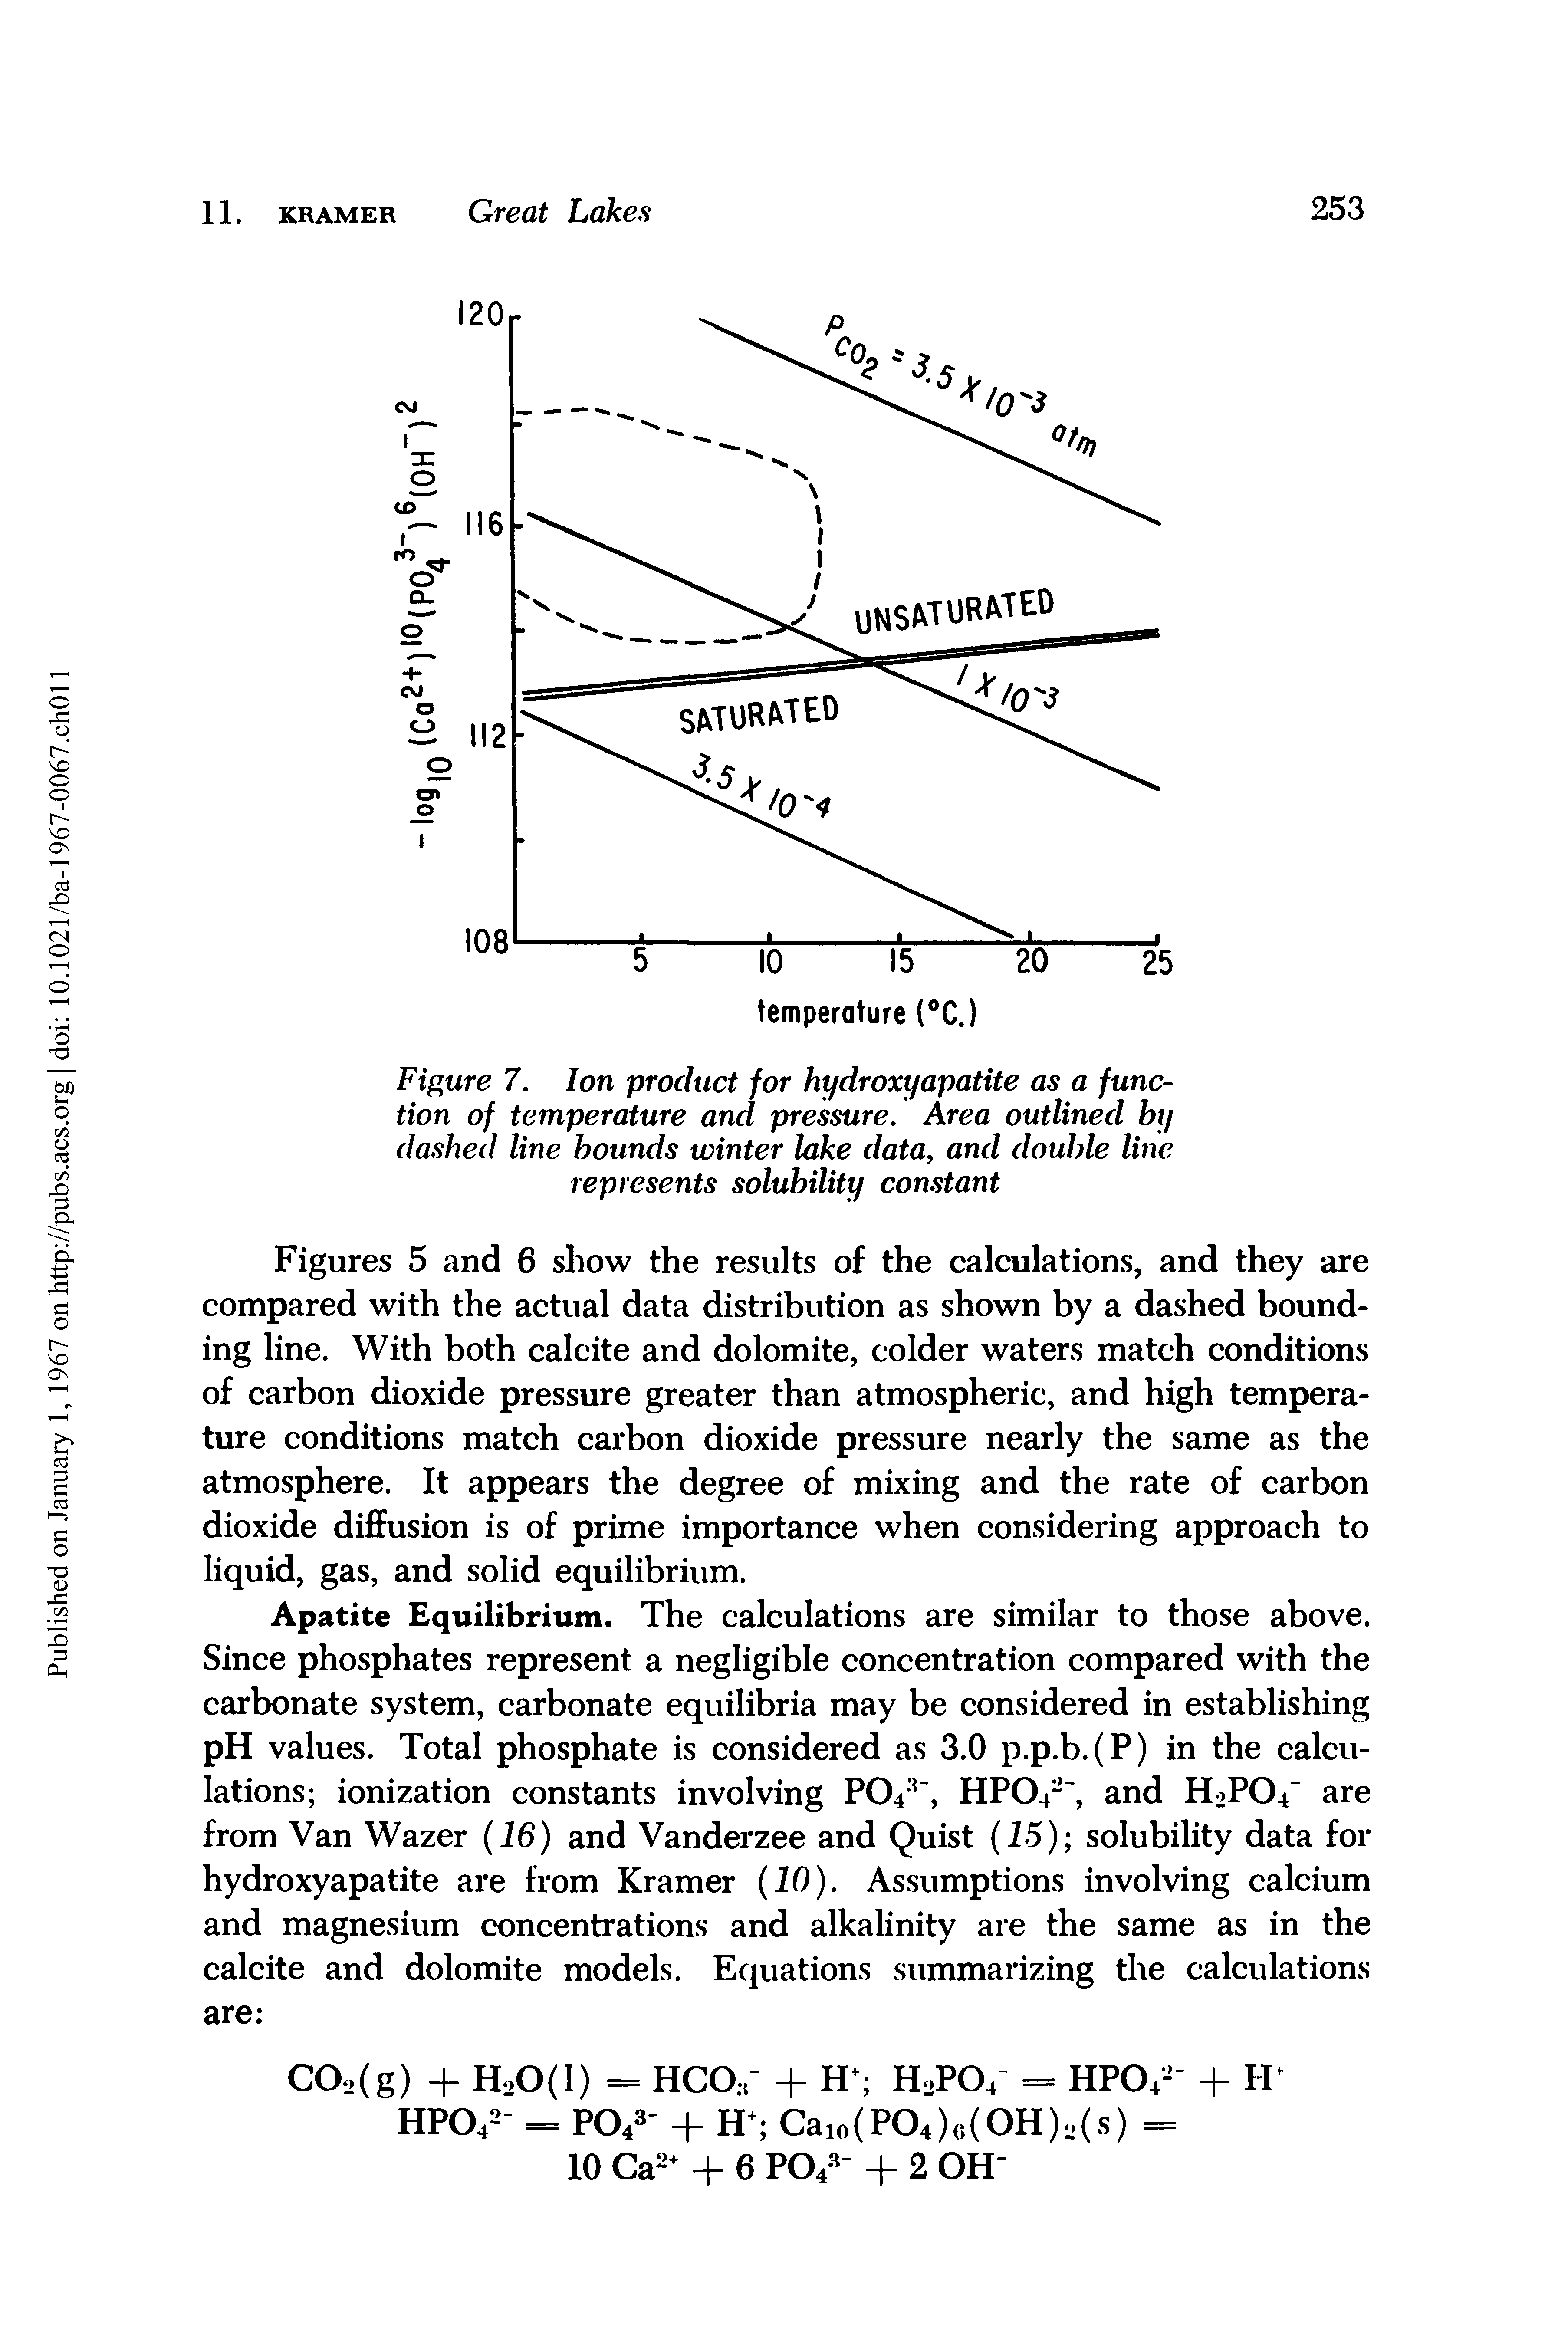 Figure 7. Ion product for hydroxyapatite as a function of temperature and pressure. Area outlined by dashed line bounds winter lake data, and double line represents solubility constant...